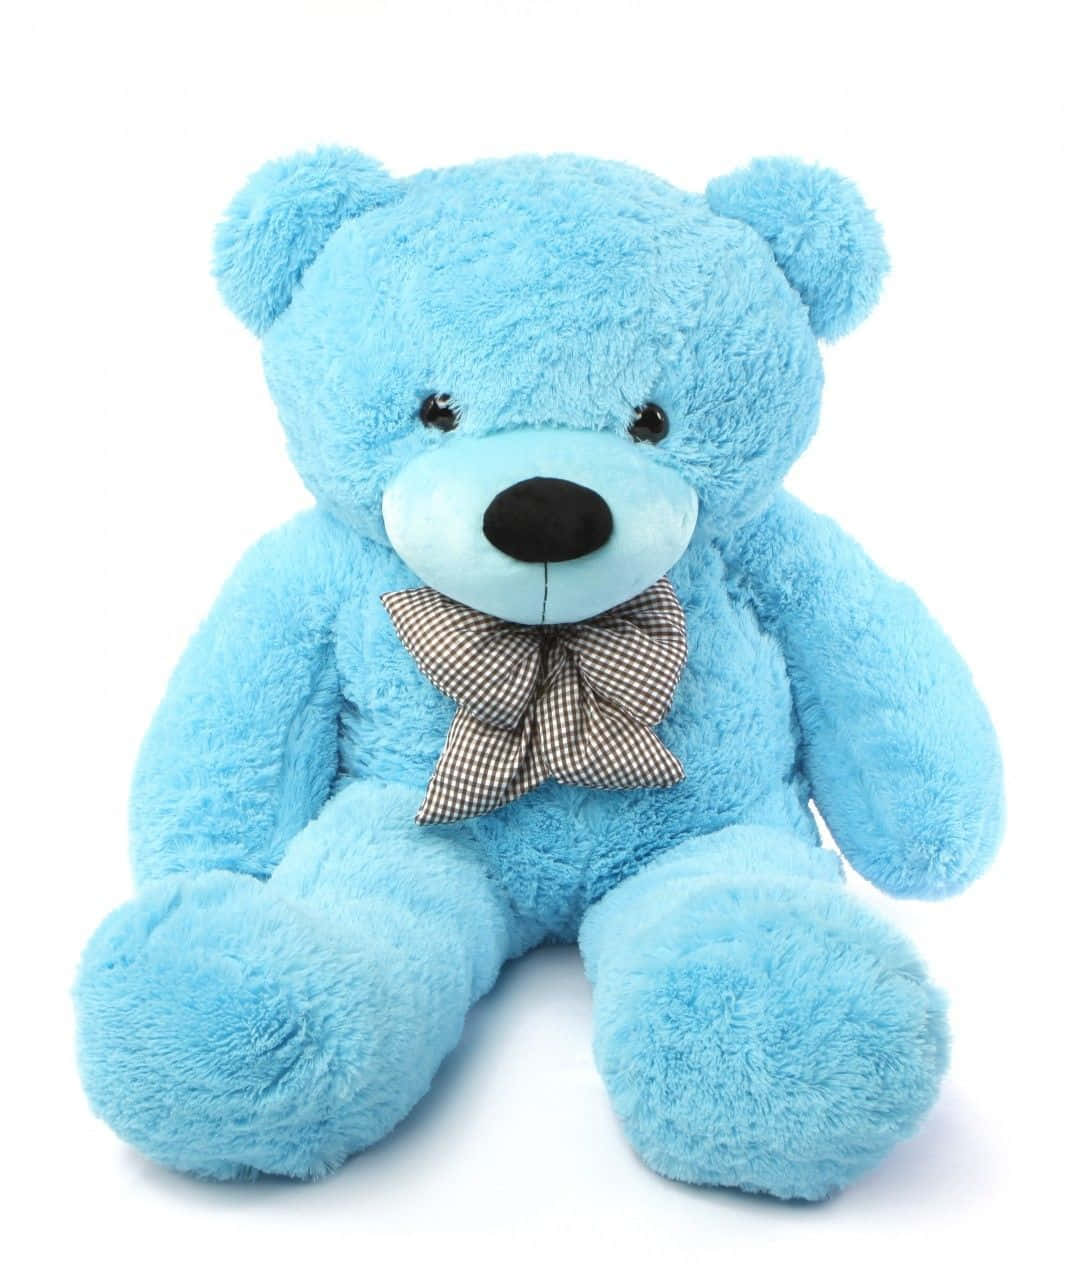 "The perfect teddy bear for little ones to cuddle and keep them company".